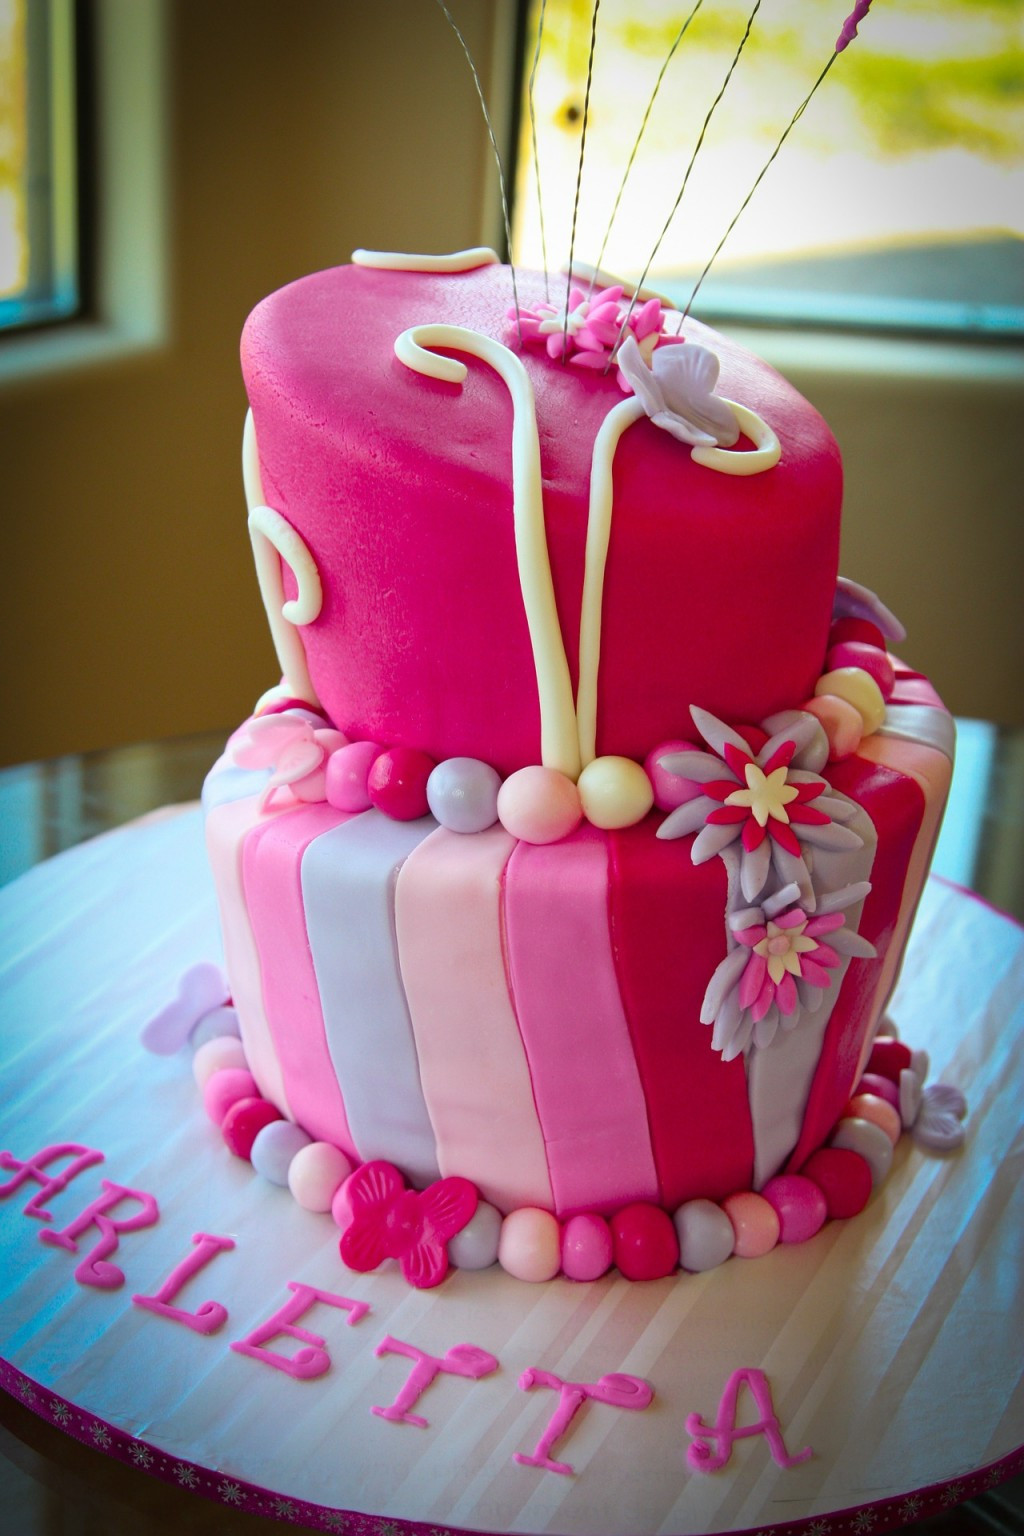 Pictures Of Beautiful Birthday Cakes
 50 Beautiful Birthday Cake and Ideas for Kids and